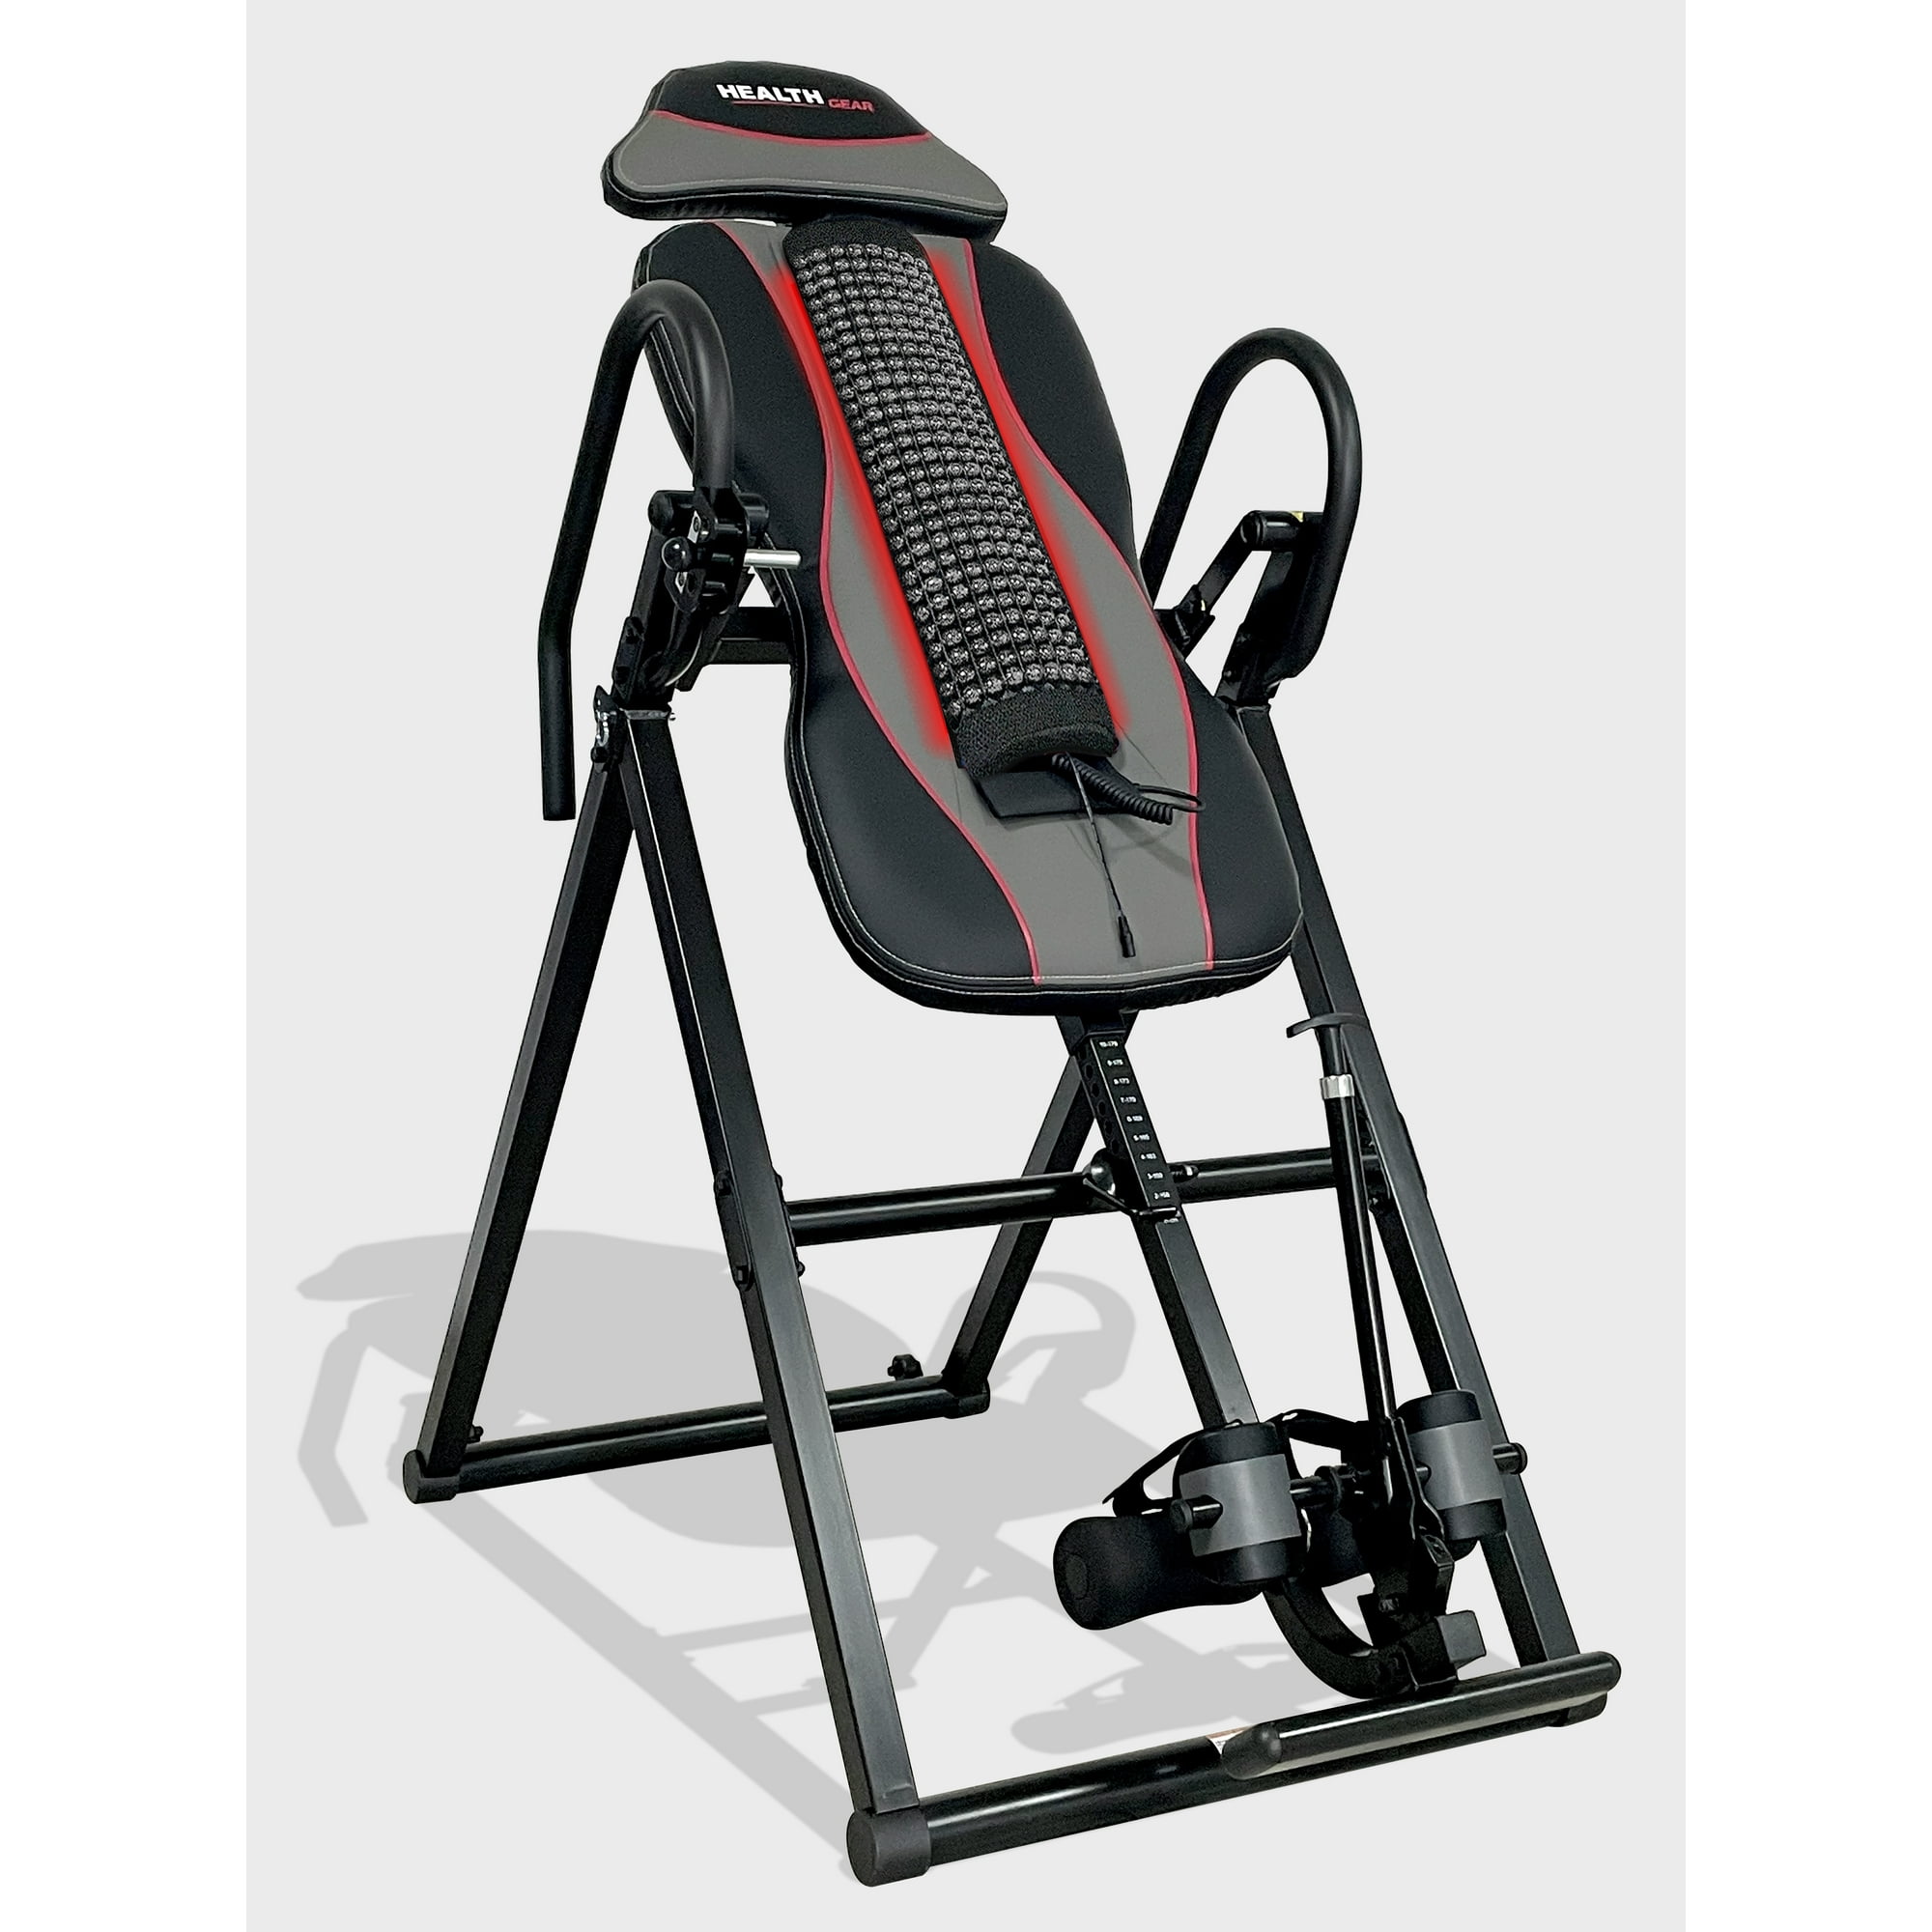 Mastercare Back-A-Traction Inversion Table Relax The Back, 56% OFF